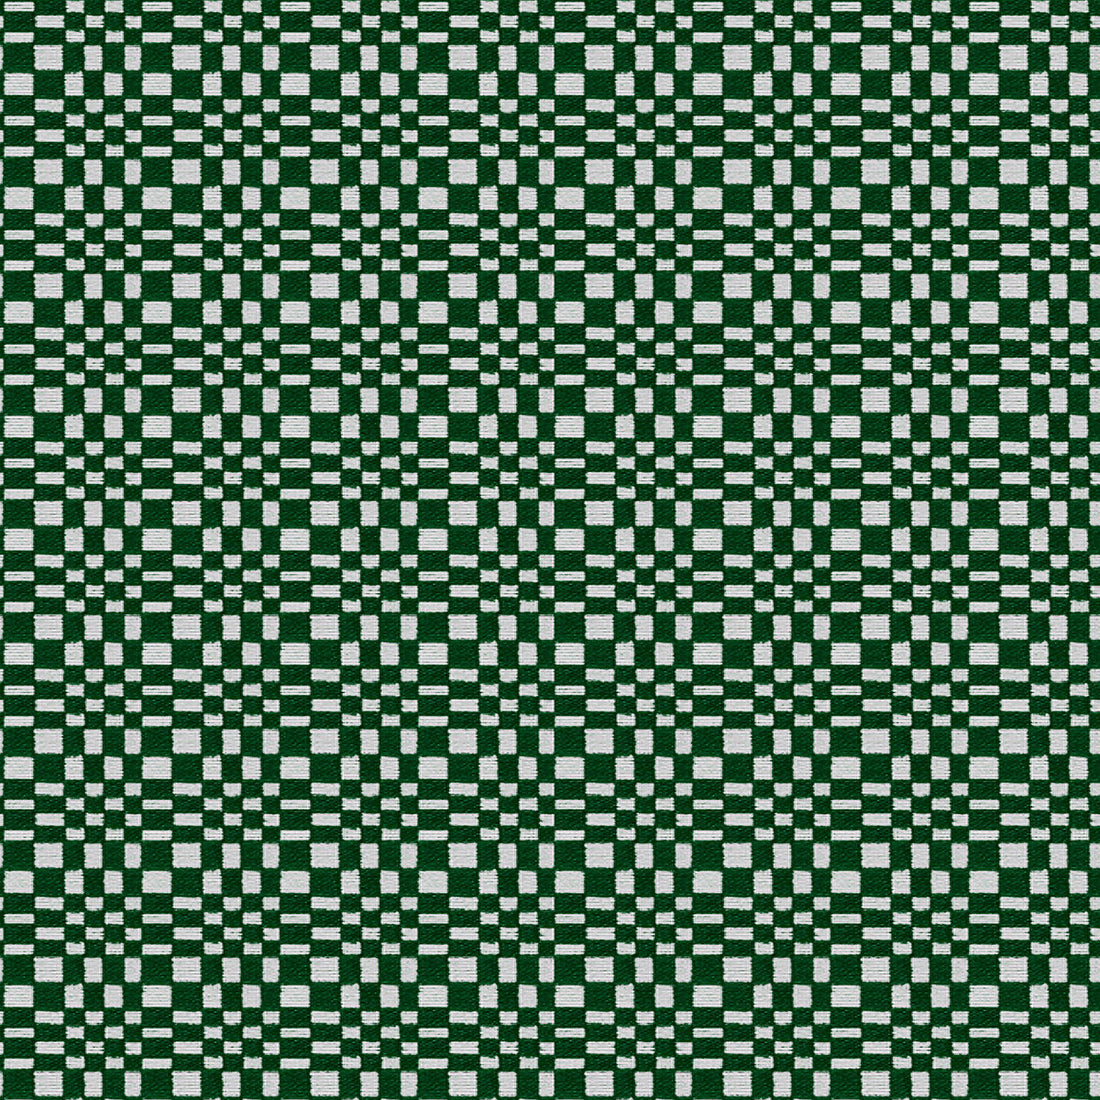 Santa Eulalia fabric in verde oscuro color - pattern GDT5686.001.0 - by Gaston y Daniela in the Gaston Maiorica collection